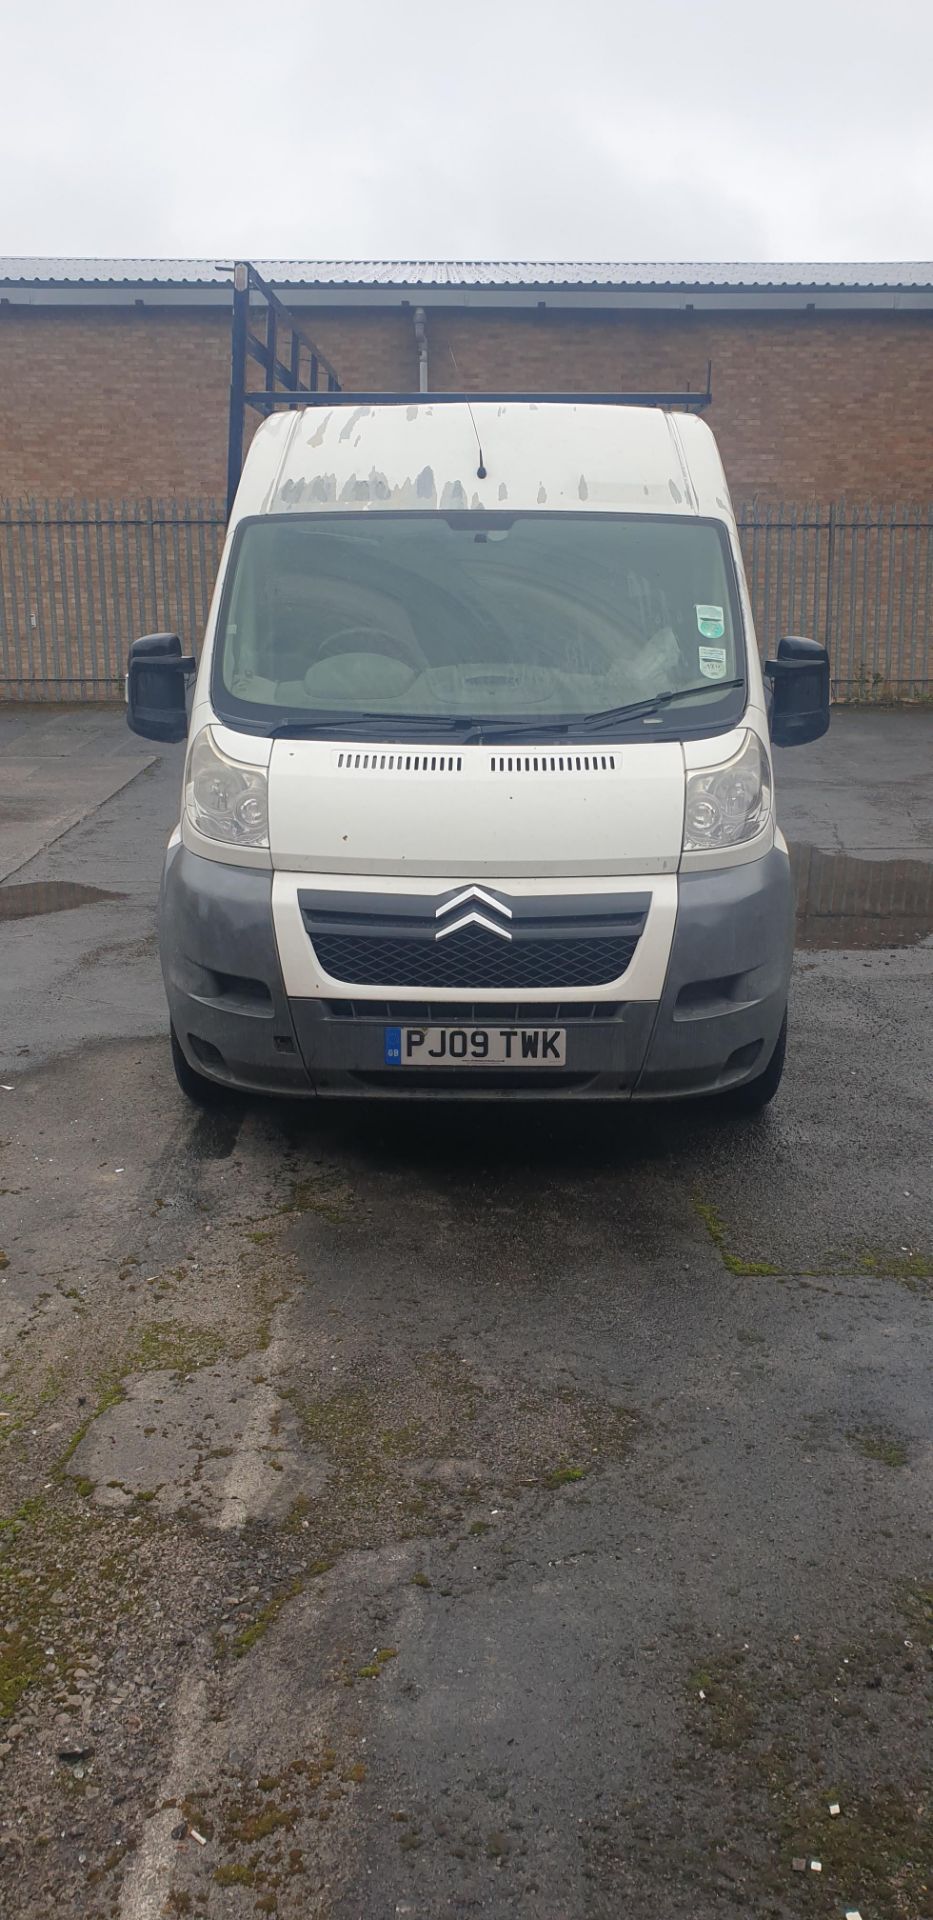 2009 Citroen Relay 35 HDI 120 LWB panel van with glass racks to side and roof